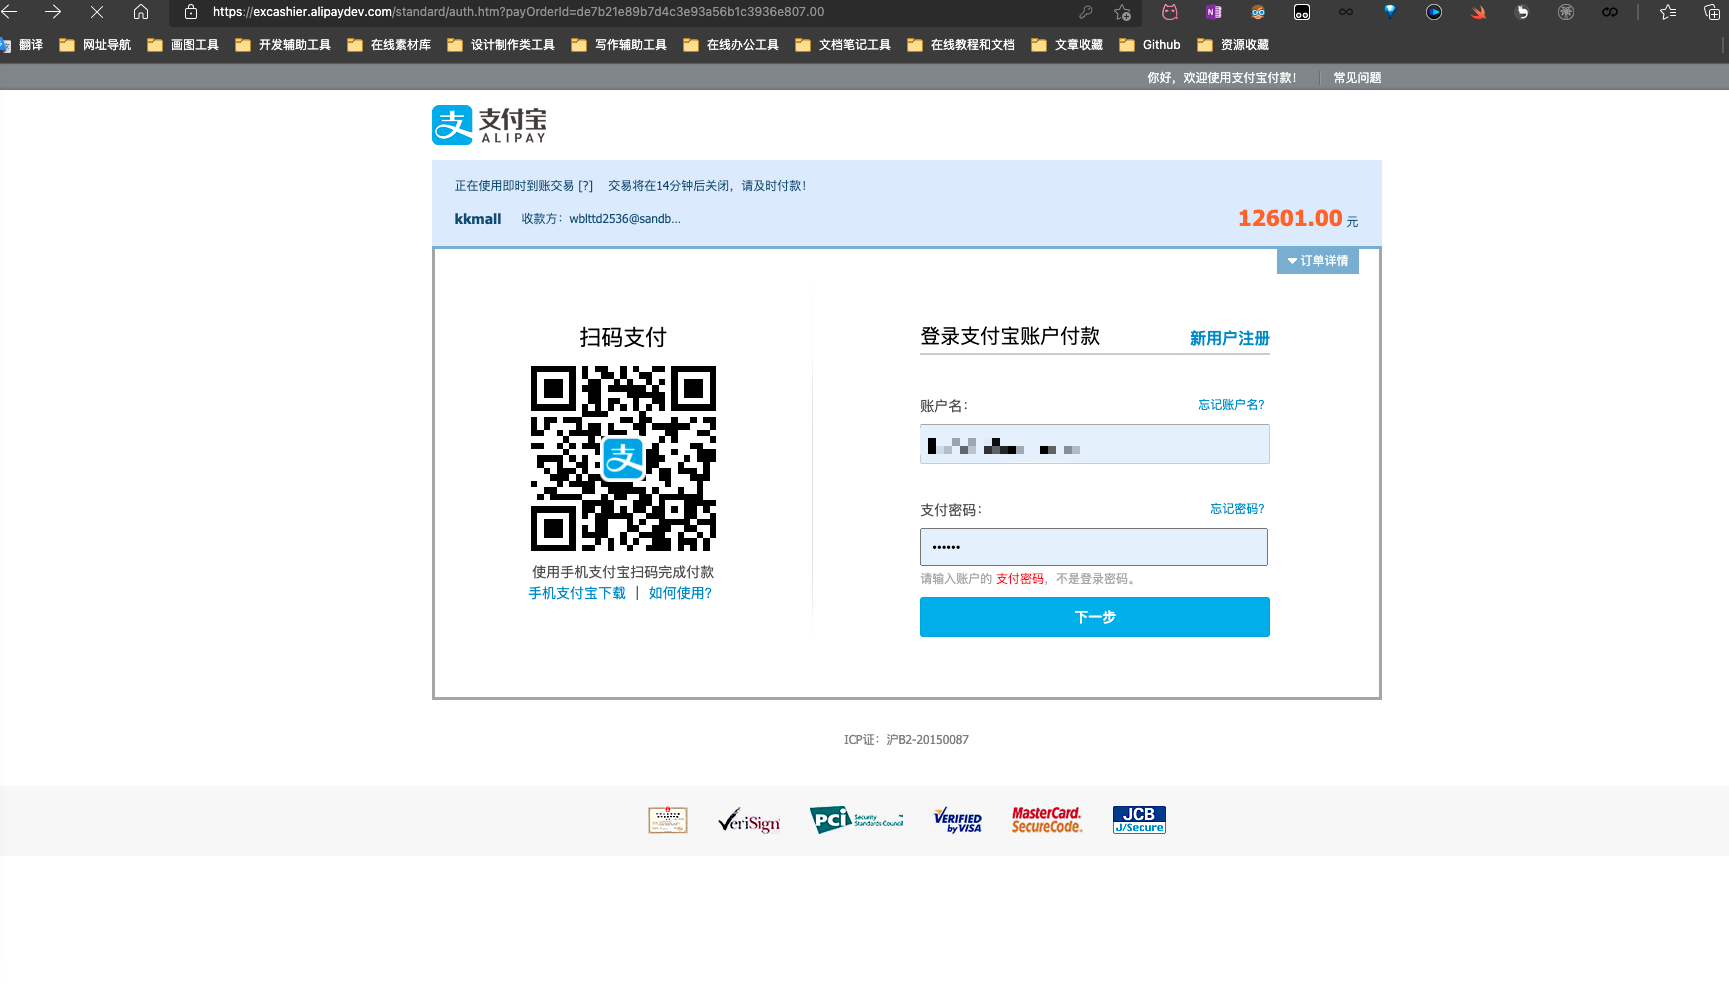 kkmall-alipay.png